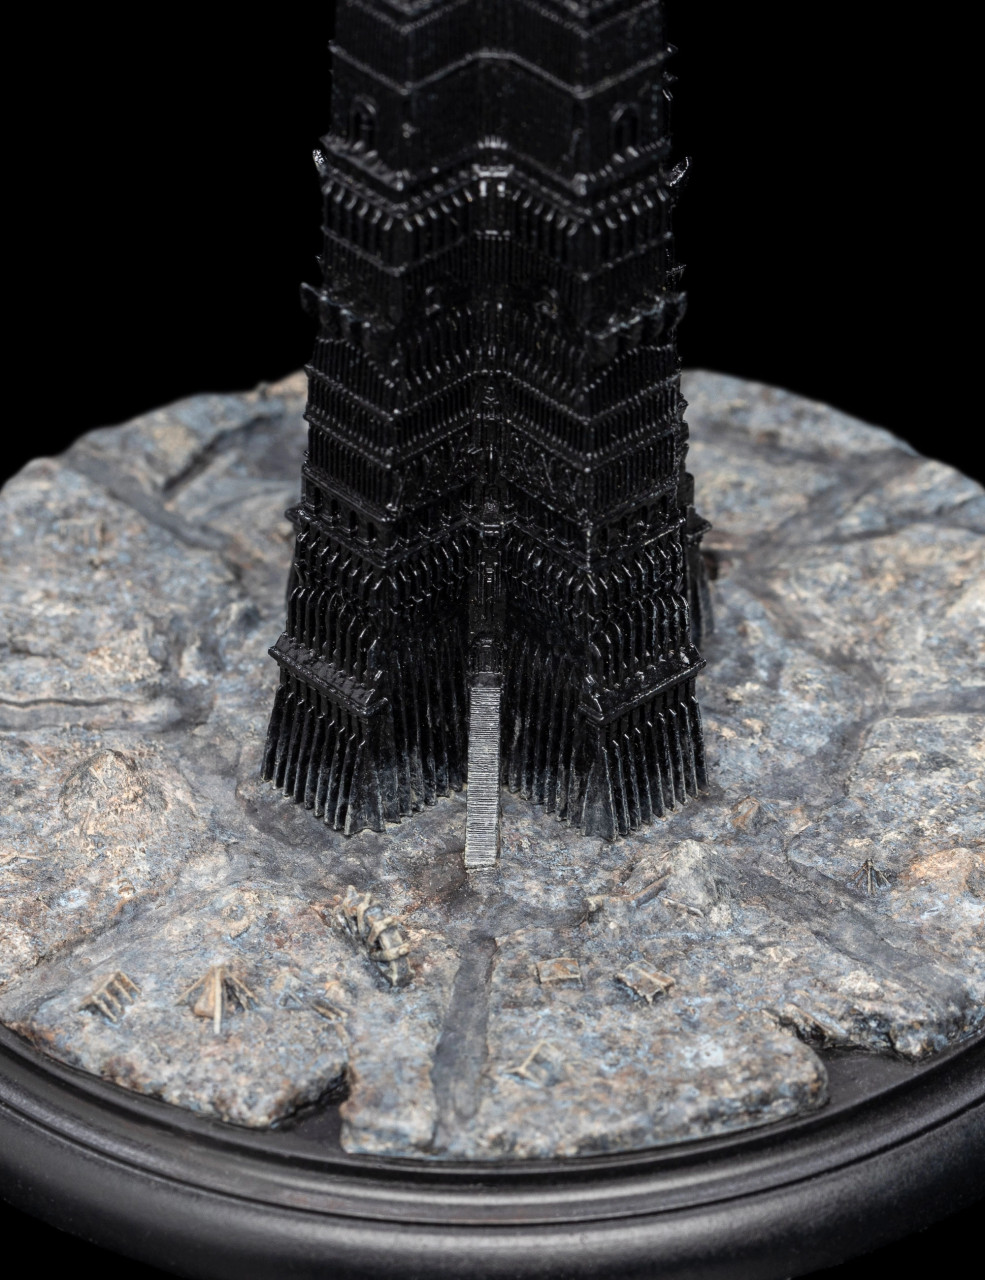 WETA LORD OF THE RINGS TOWER OF ORTHANC